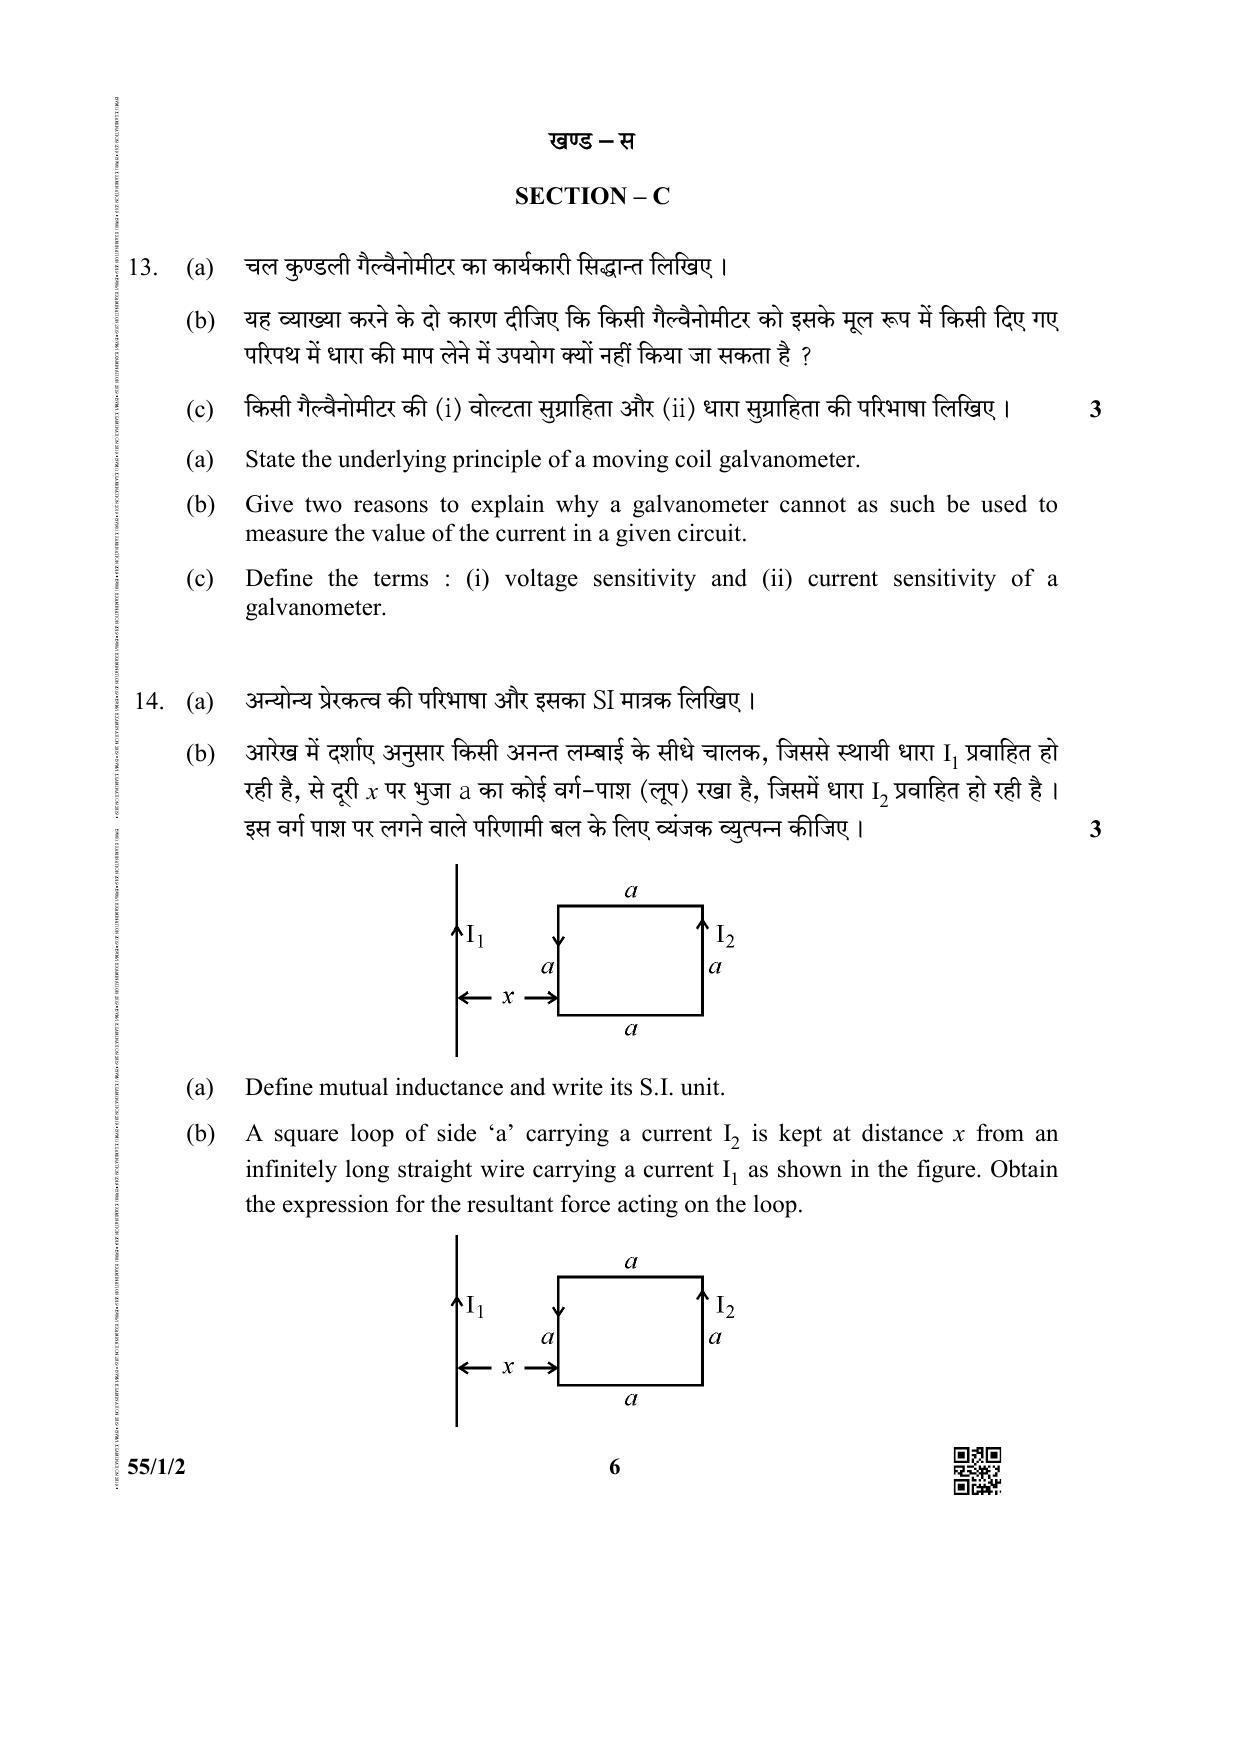 CBSE Class 12 55-1-2 (Physics) 2019 Question Paper - Page 6